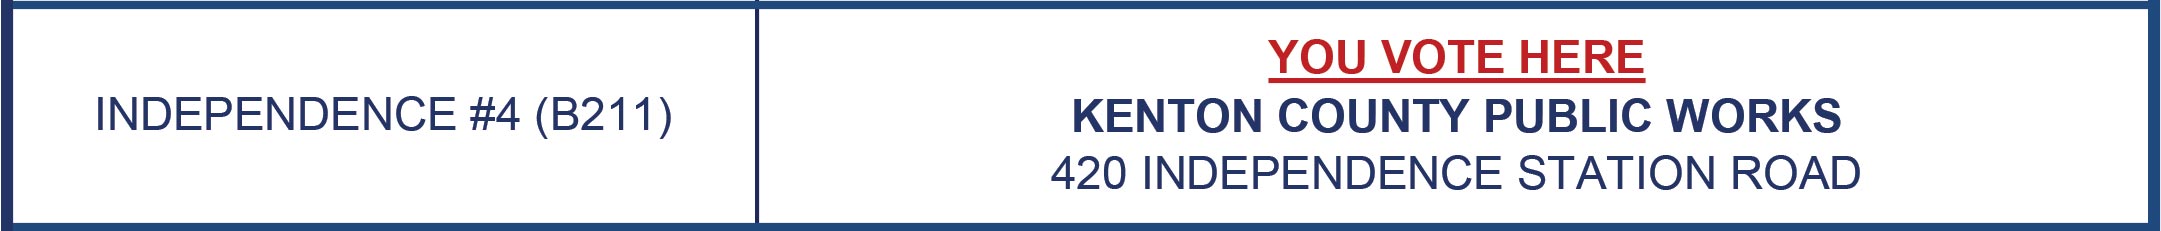 KENTON COUNTY PUBLIC WORKS 420 INDEPENDENCE STATION ROAD